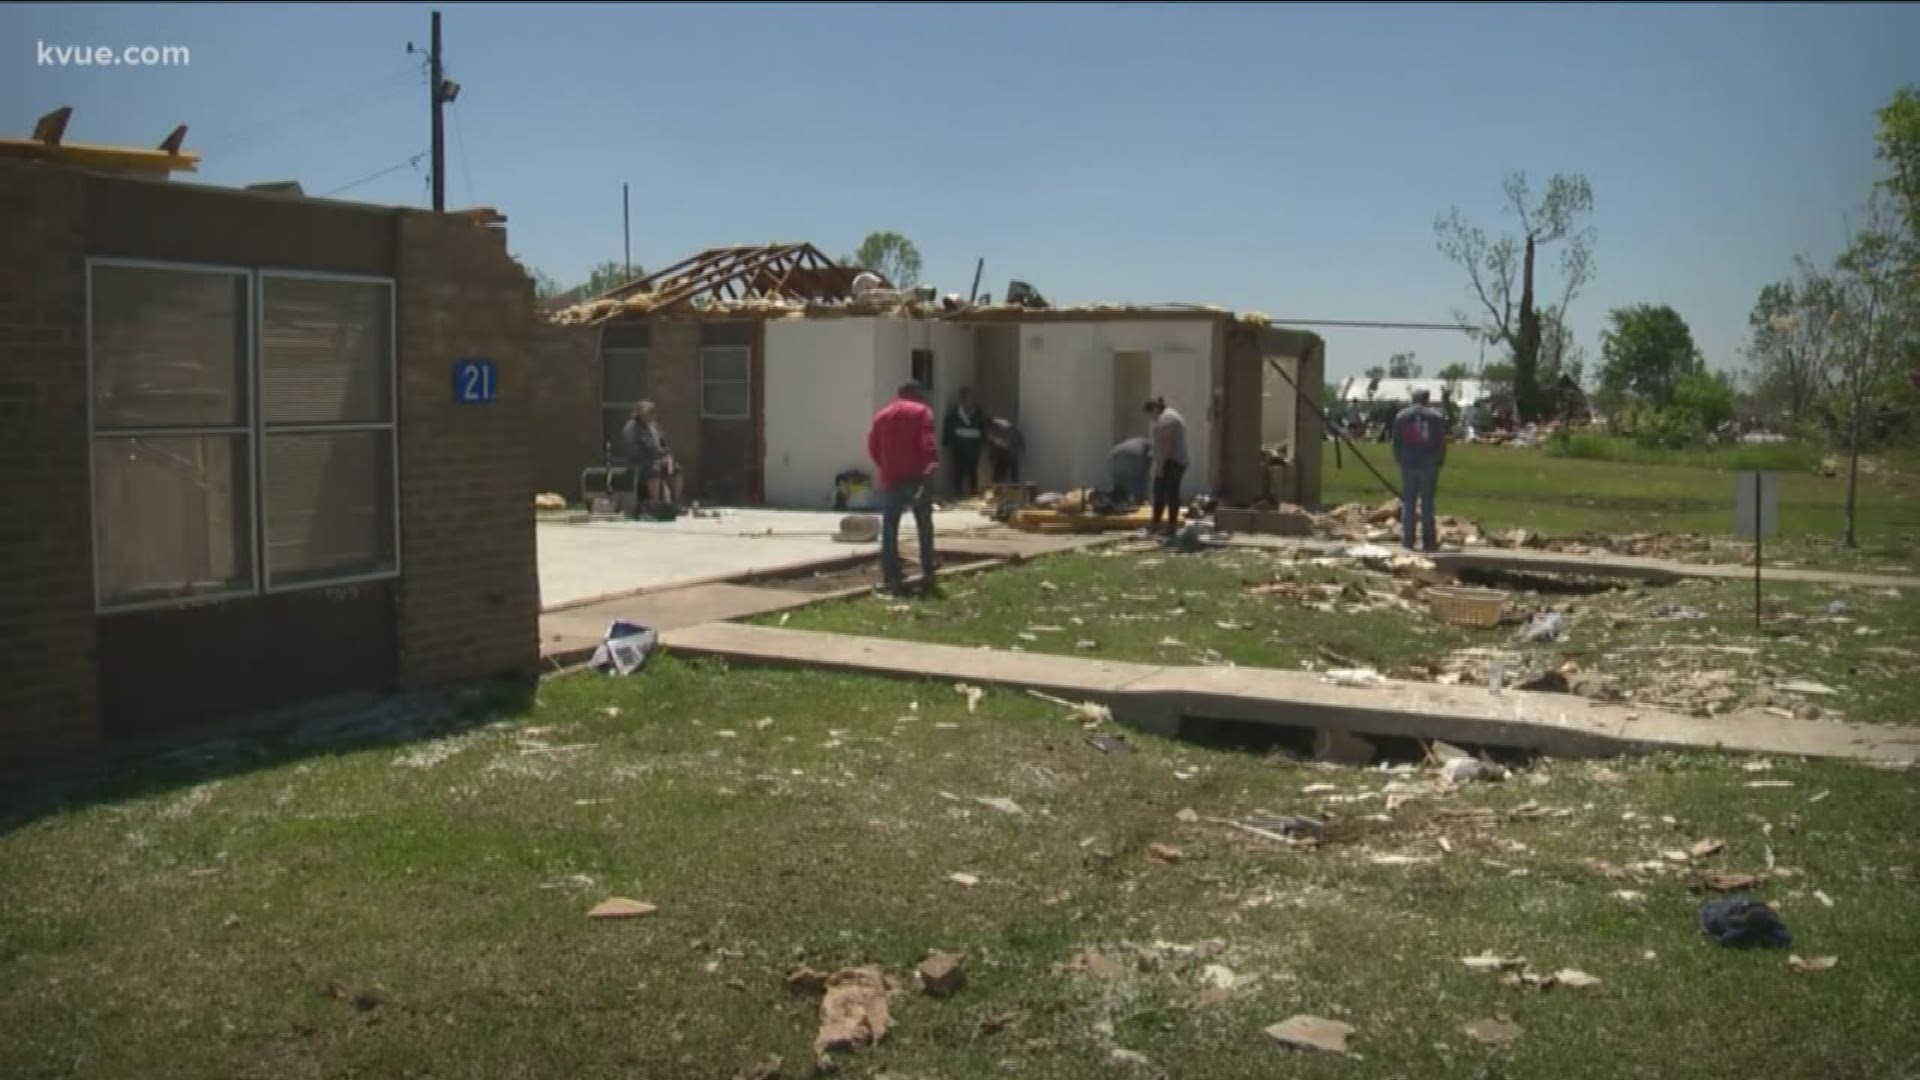 The community of Franklin was hit by a EF3 tornado Saturday. It caused at least $3 million in damage.